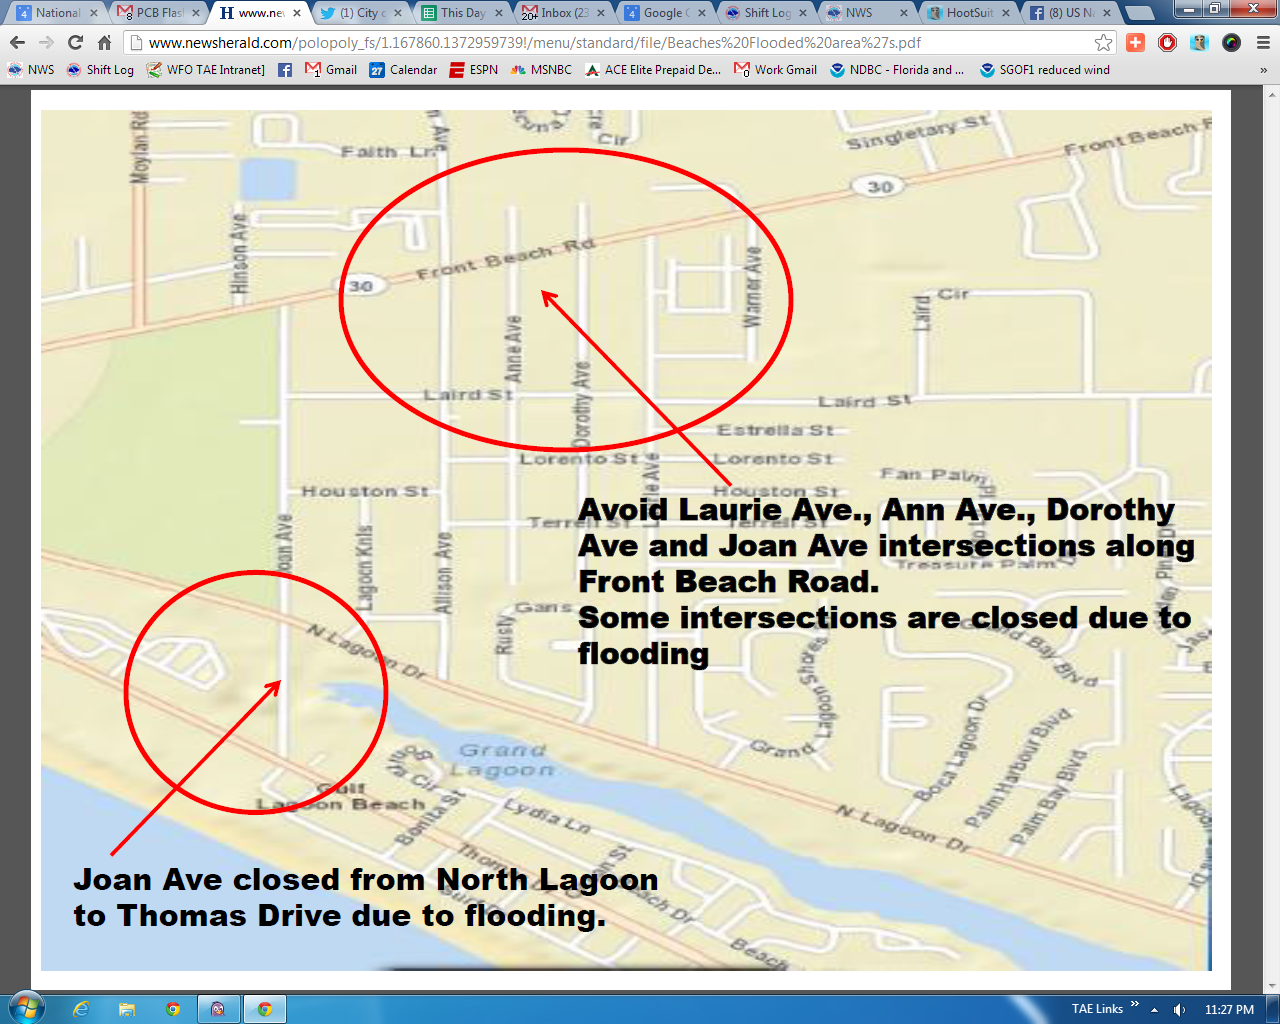 A map posted on the website of The News Herald showing locations of flooded roads and intersections on Independence Day 2013 in Panama City, FL.